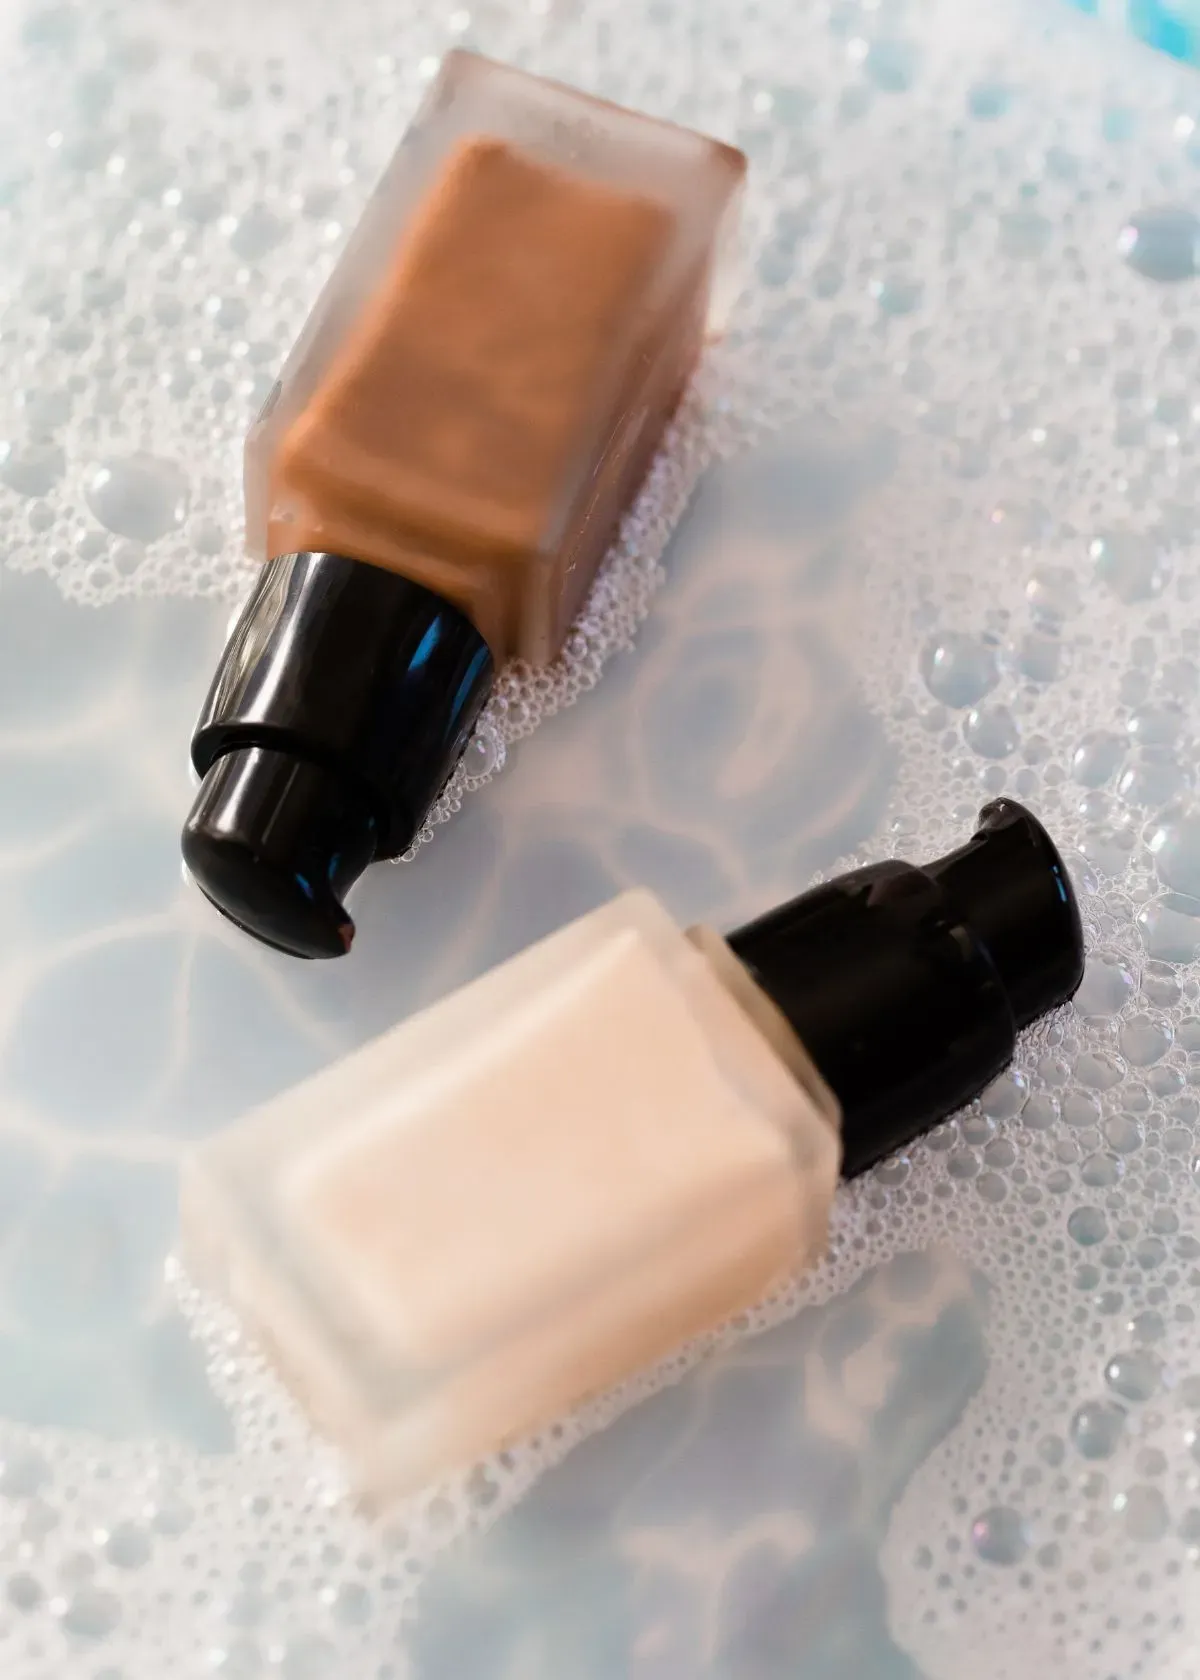 How Do You Know if Your Foundation Is Water or Silicone Based?